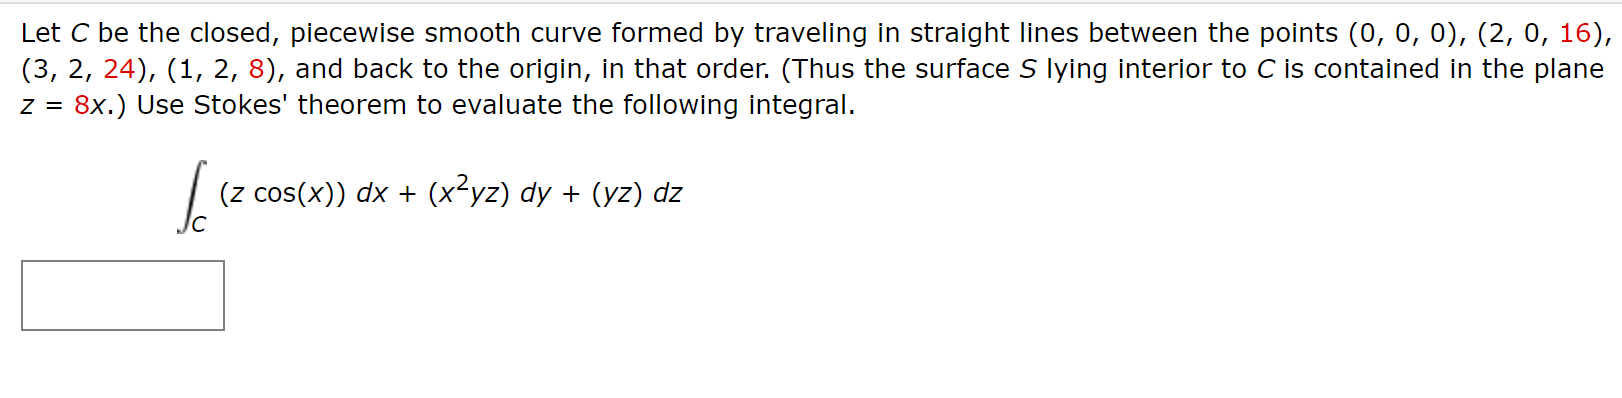 Let C be the closed, piecewise smooth curve formed by traveling in straight lines between the points (0, 0, 0), (2, 0, 16),
(3, 2, 24), (1, 2, 8), and back to the origin, in that order. (Thus the surface S lying interior to C is contained in the plane
8x.) Use Stokes' theorem to evaluate the following integral.
(z cos(x)) dx + (x-yz) dy + (yz) dz
